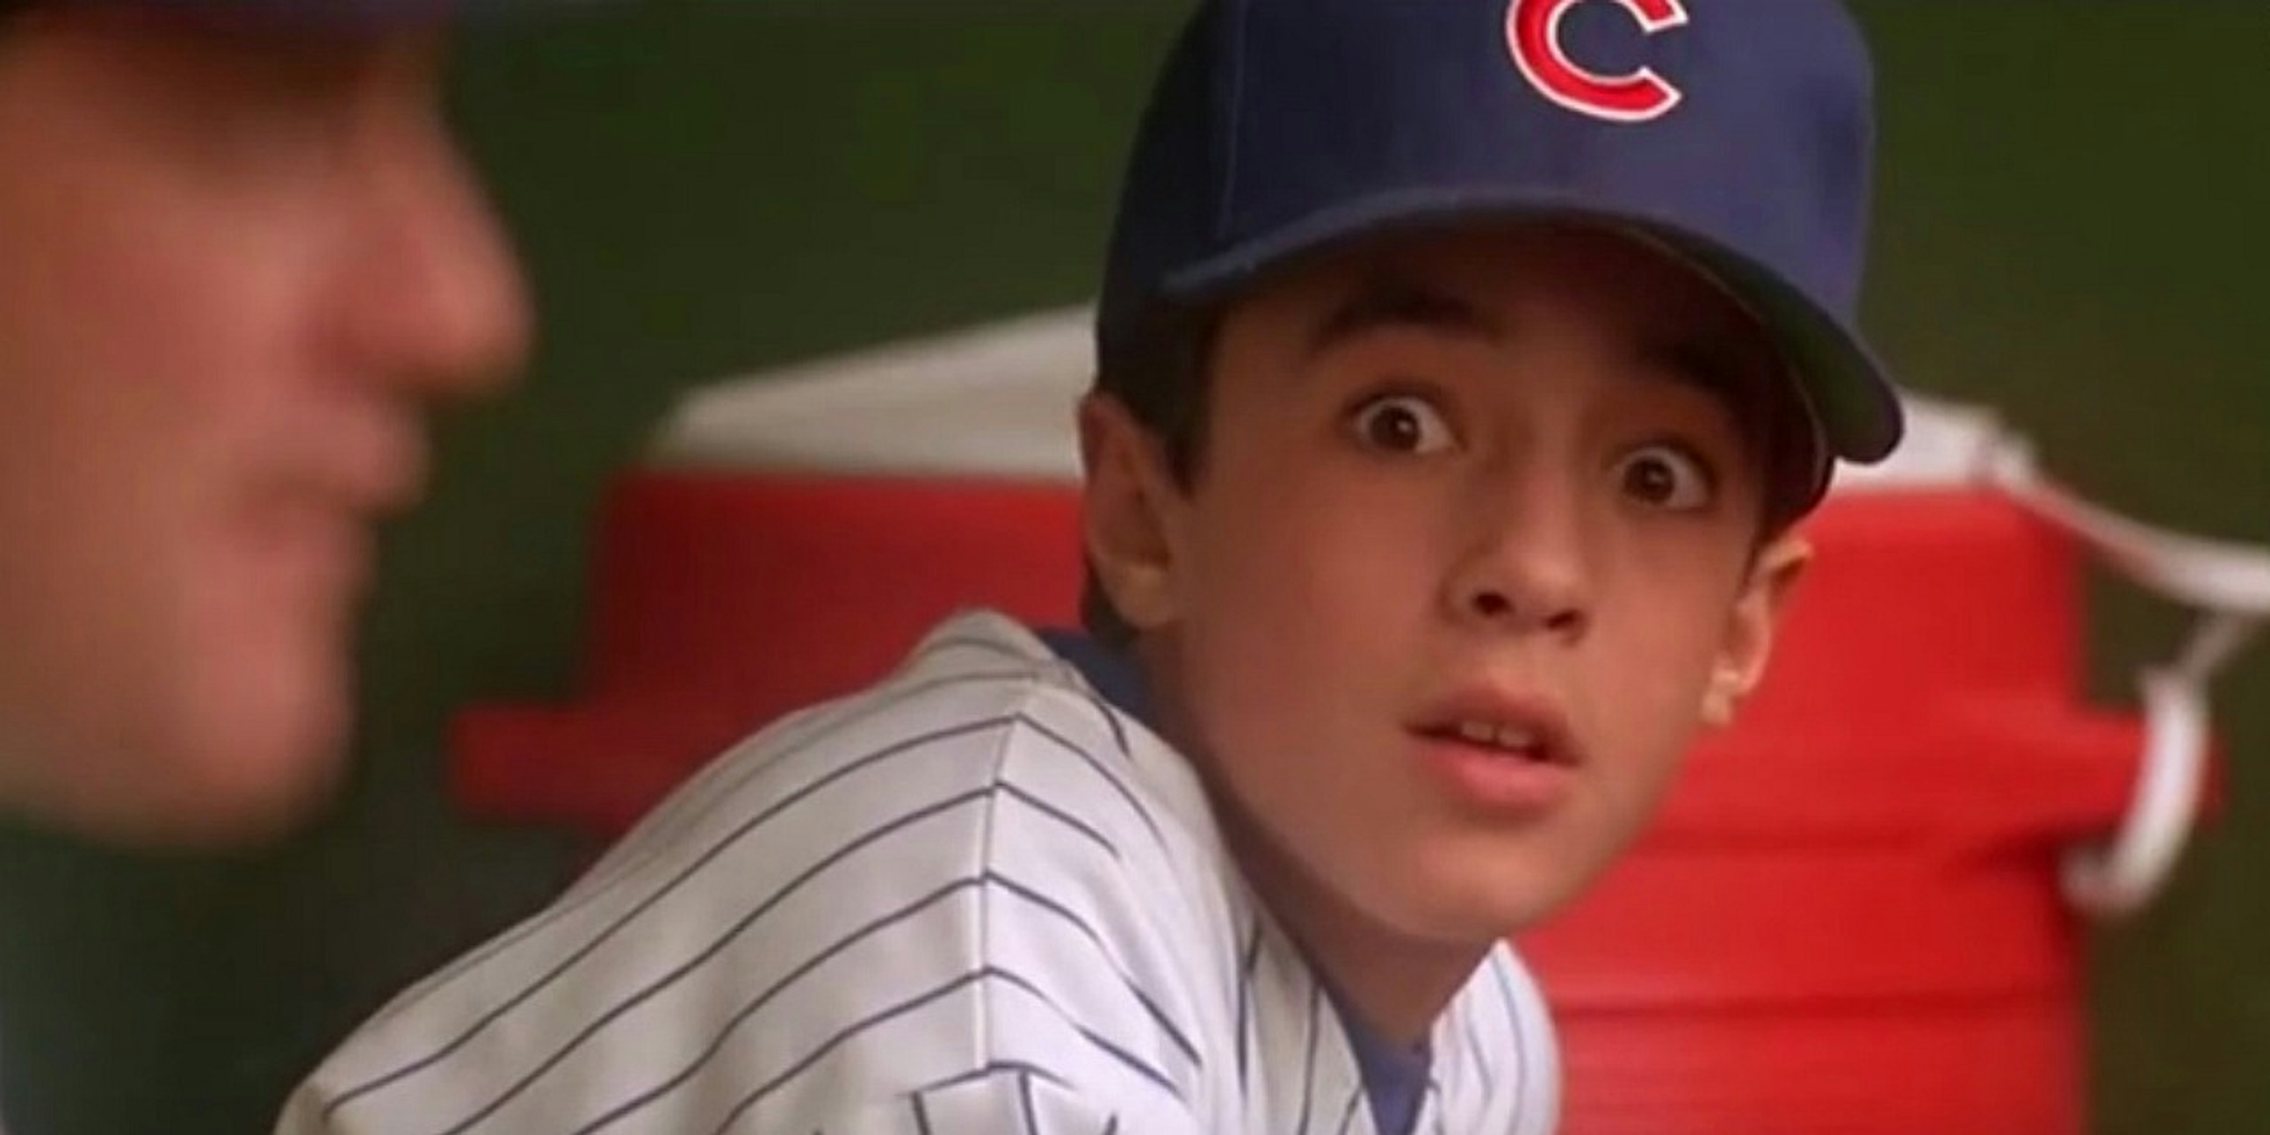 Rookie of the Year' star will return to Wrigley Field as Chicago